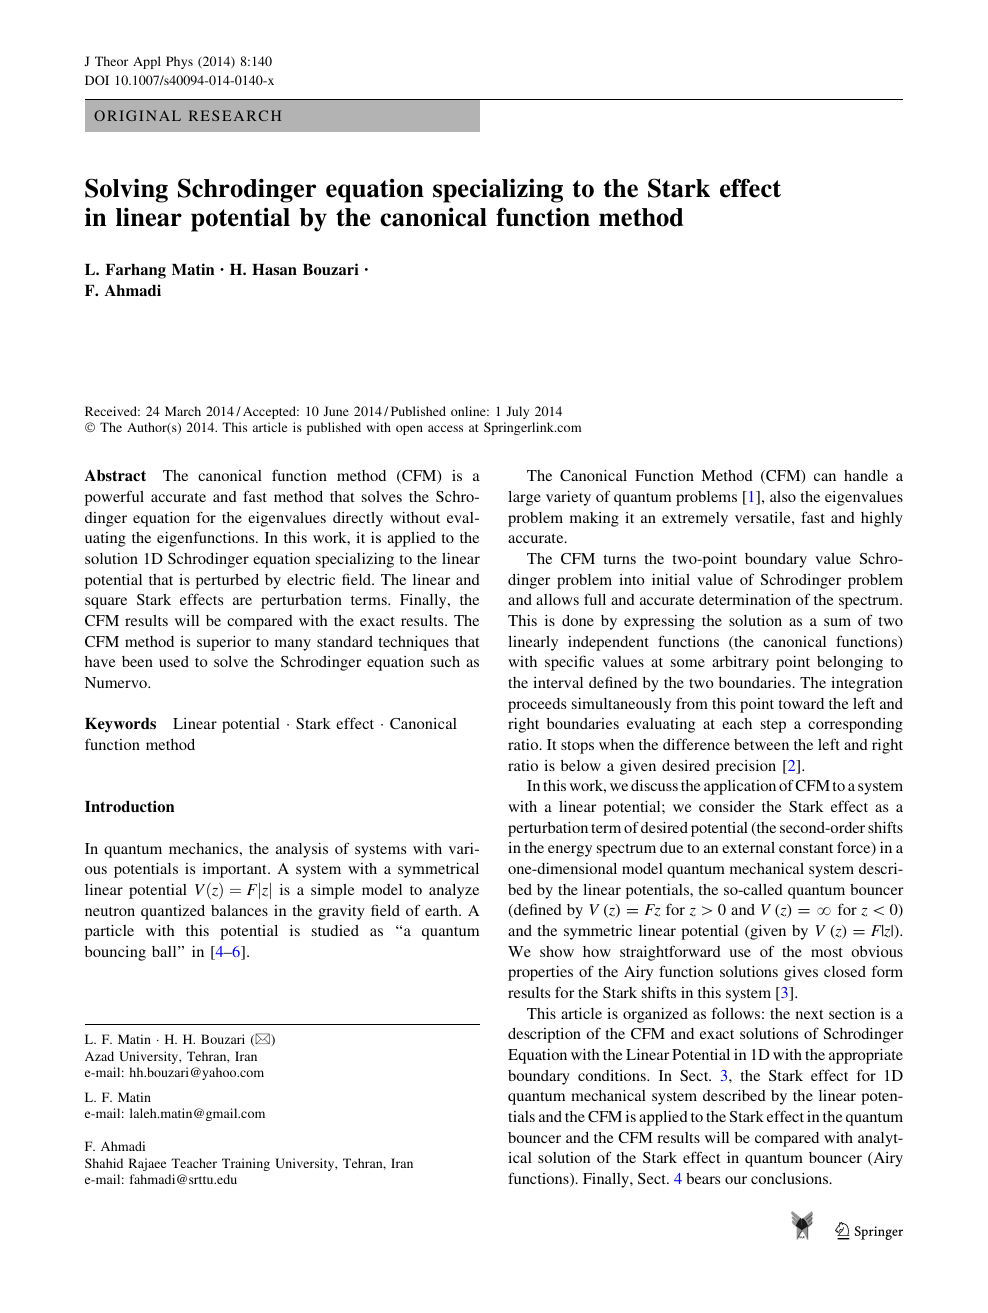 Solving Schrodinger Equation Specializing To The Stark Effect In Linear Potential By The Canonical Function Method Topic Of Research Paper In Physical Sciences Download Scholarly Article Pdf And Read For Free